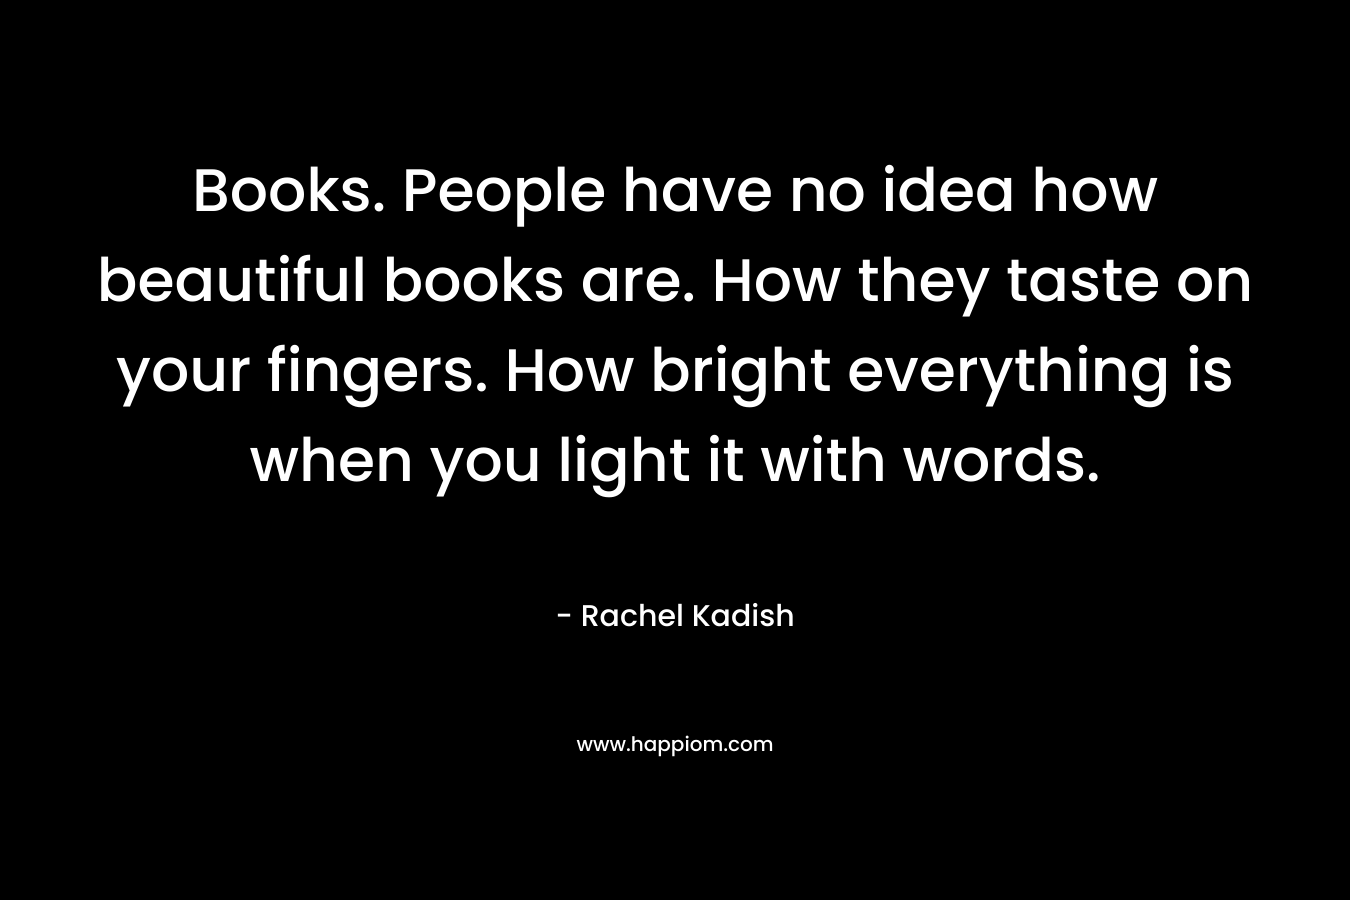 Books. People have no idea how beautiful books are. How they taste on your fingers. How bright everything is when you light it with words.